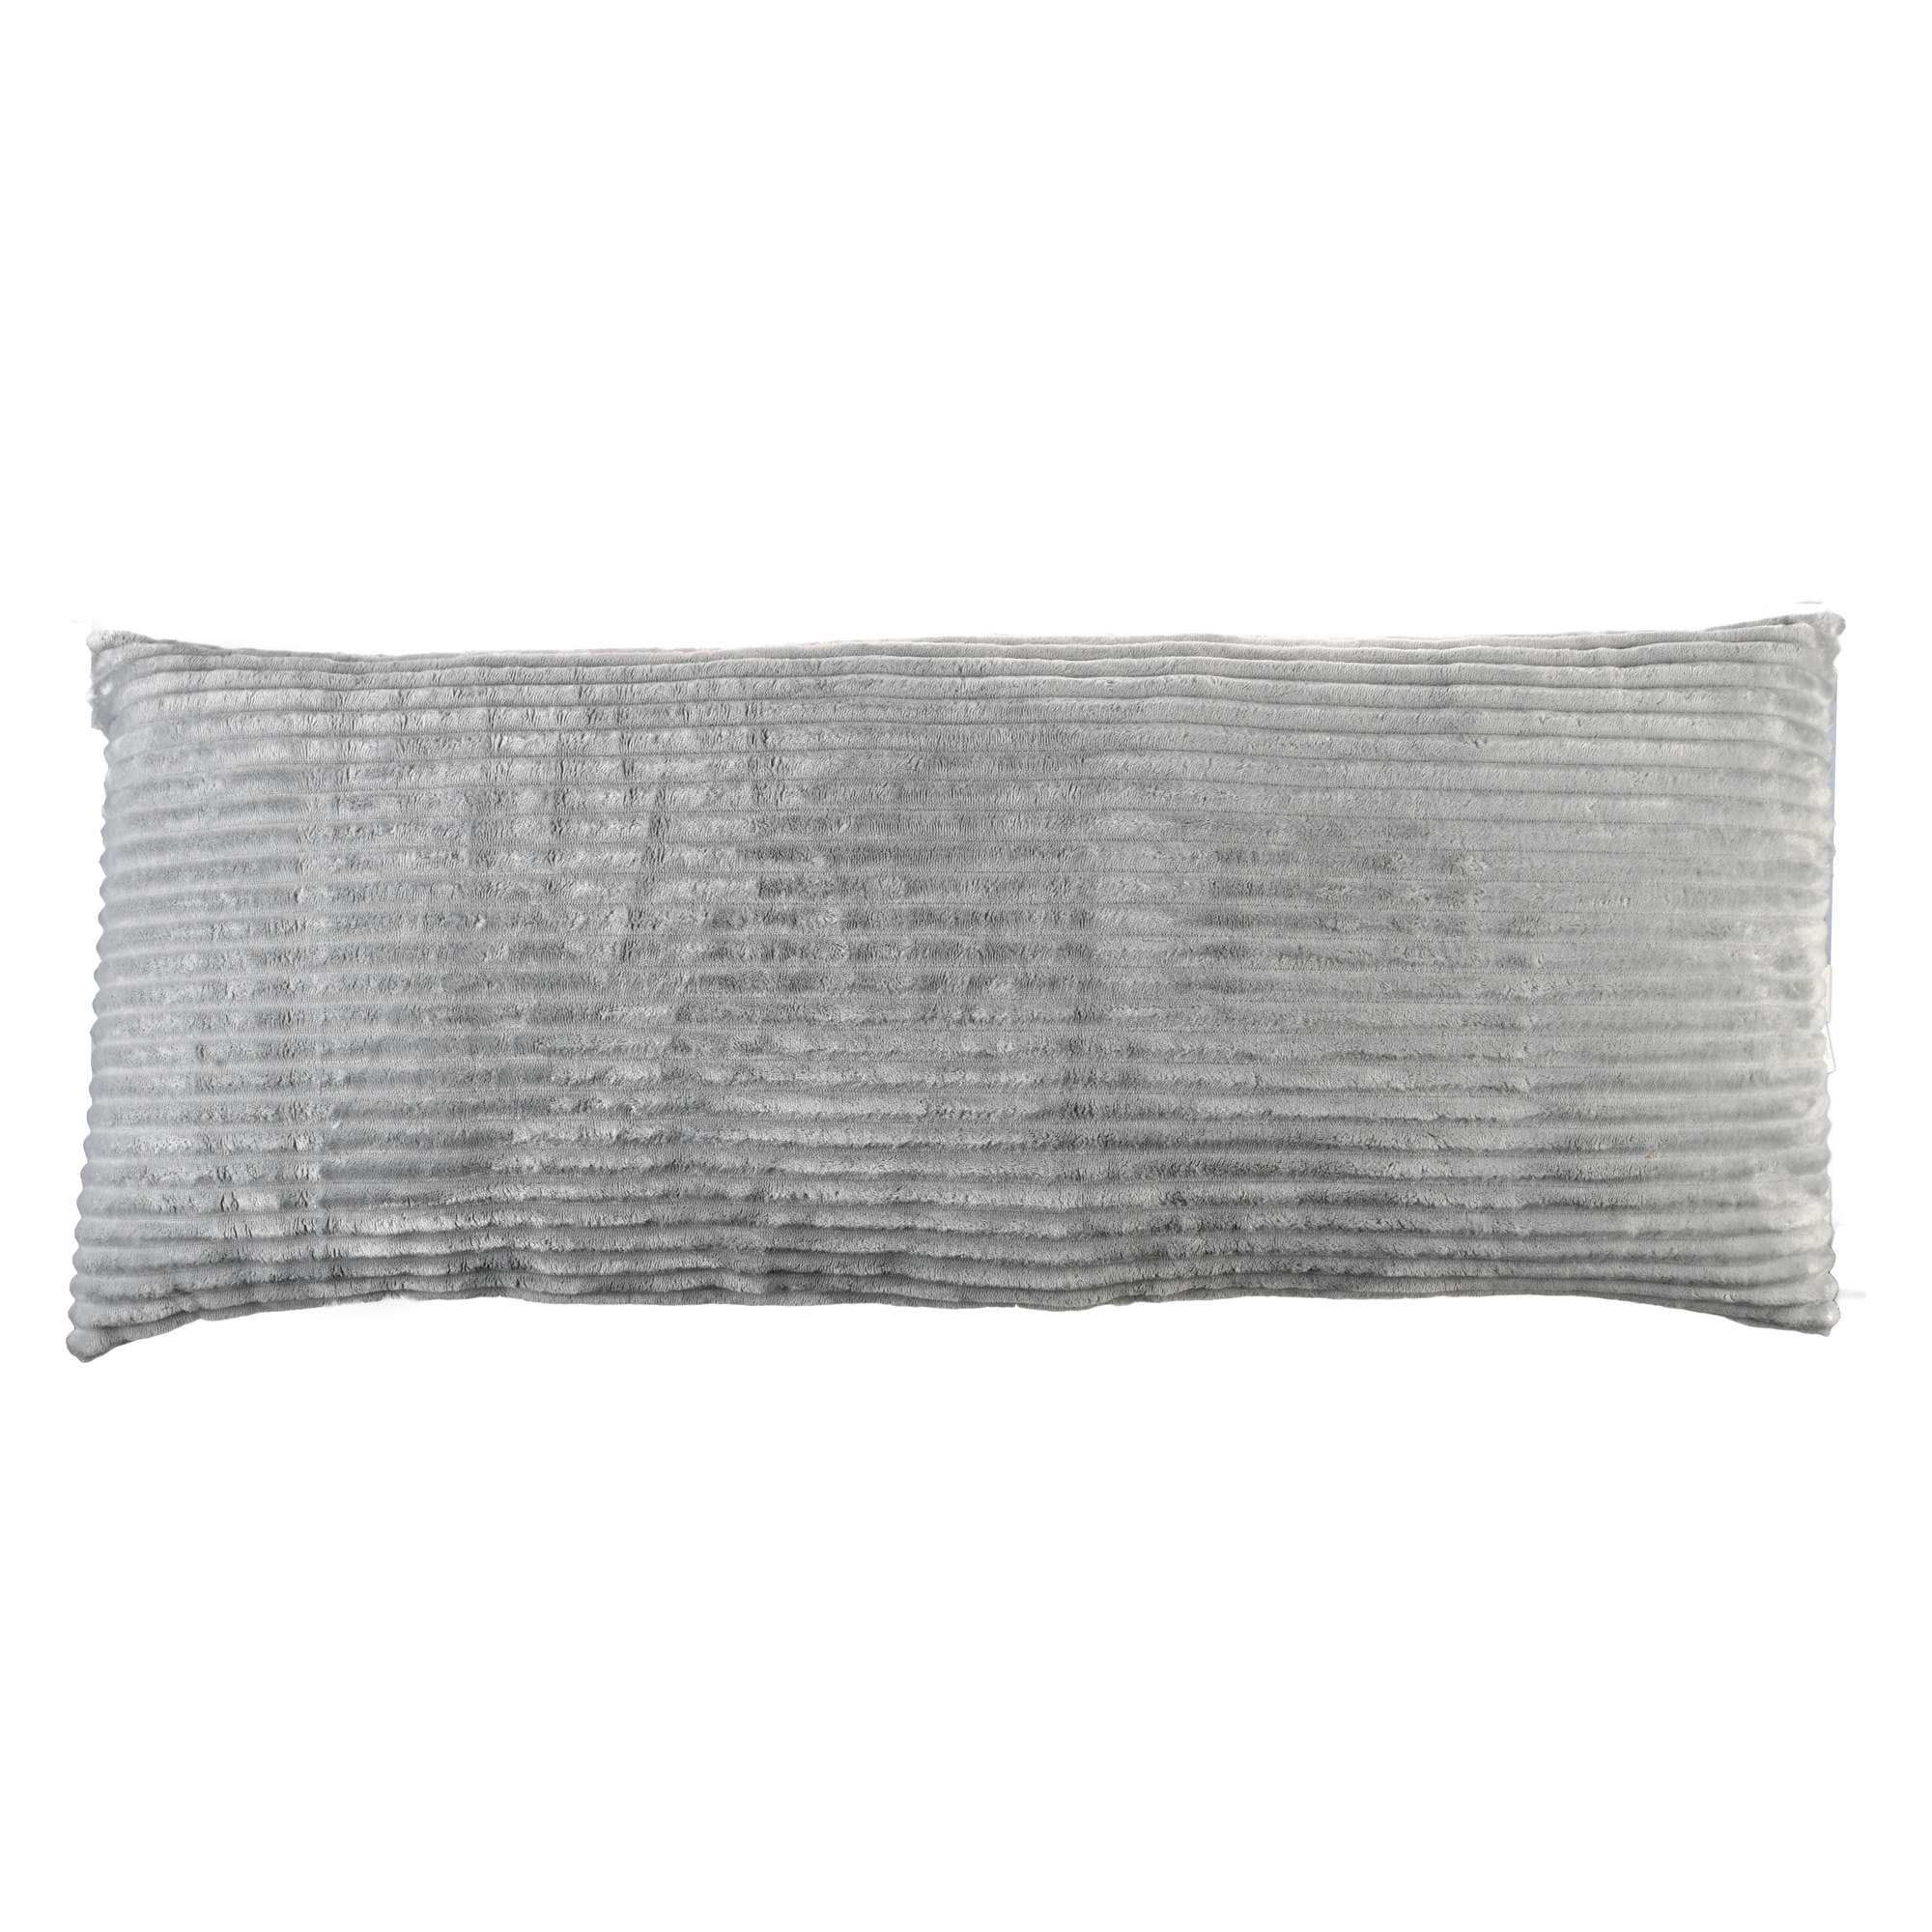 **NEW** {{SUPER SOFT}}Embossed Plush Body Pillow Cover GRAY 